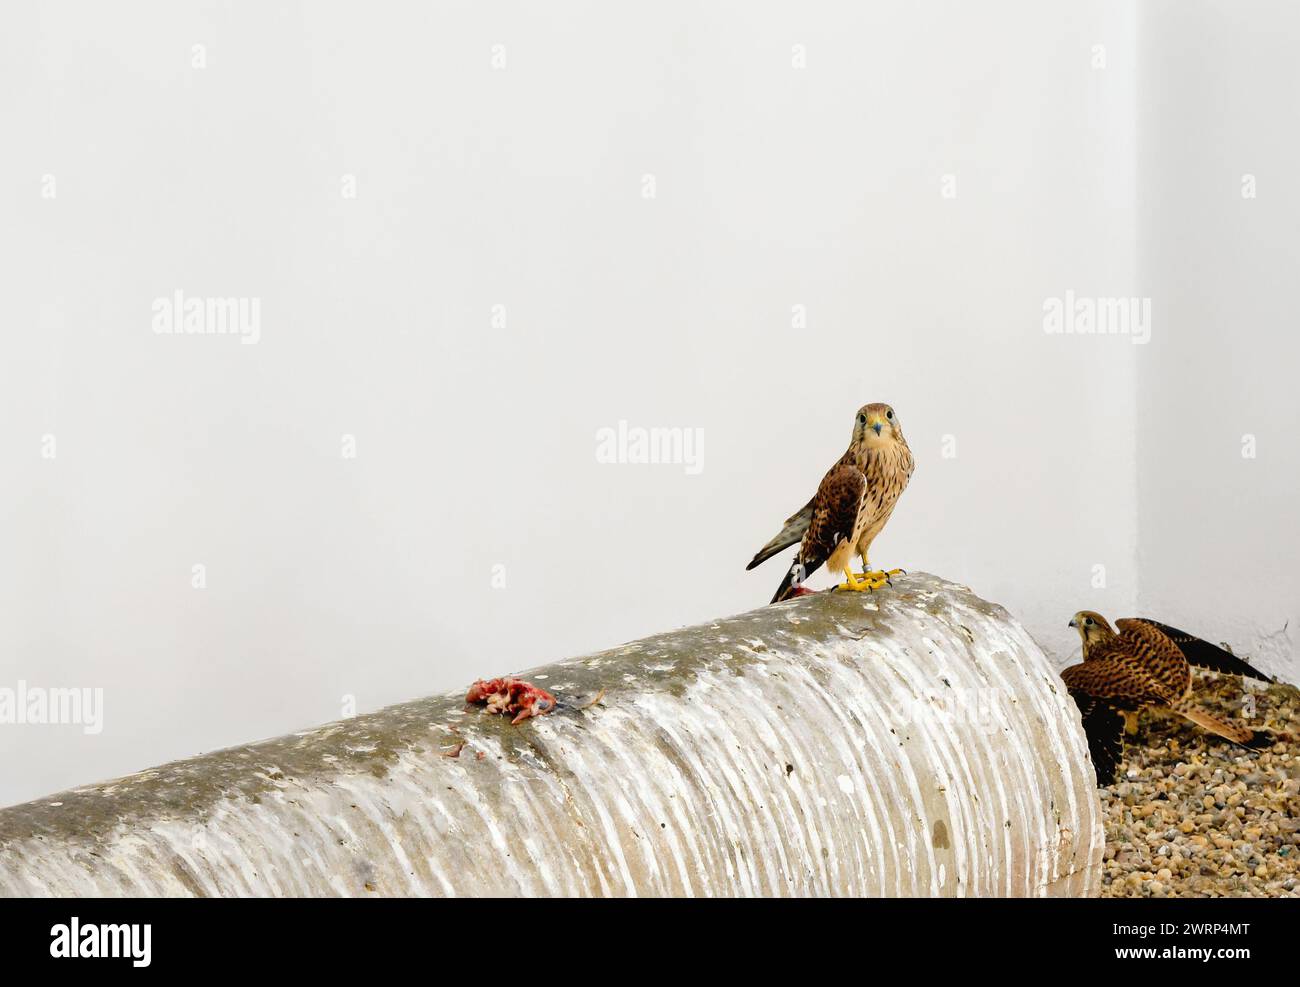 Kestrel on a metal tube between its food and another bird spreading its wings.. Falco tinnunculus Stock Photo